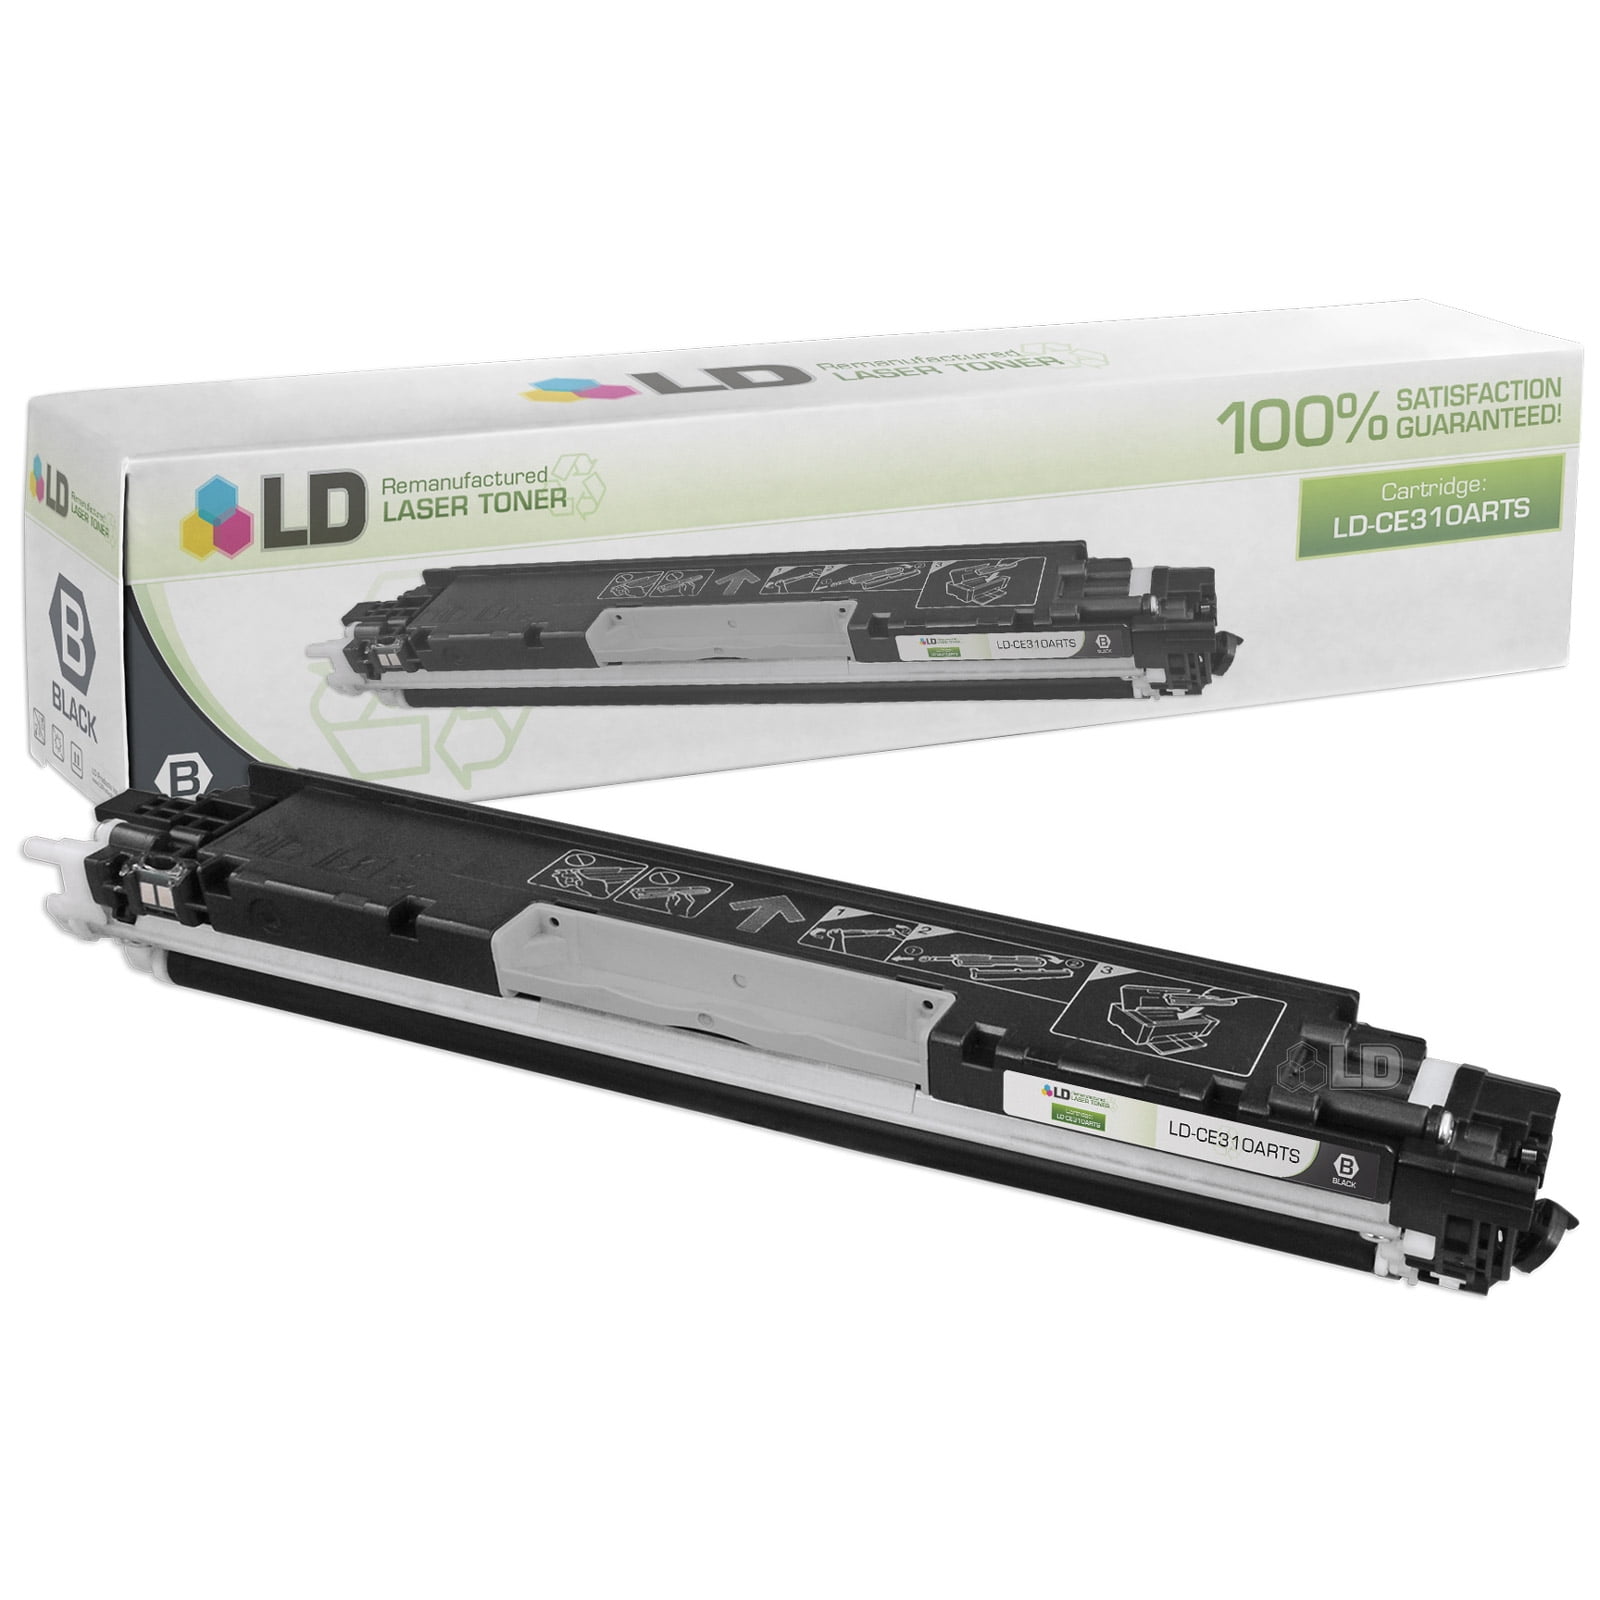 LD Remanufactured Replacement for HP 126A CE310A Black Cartridge for Color LaserJet 100 MFP M175a, 100 MFP M175nw, CP1025nw, TopShot Pro M275, LaserJet 100 MFP M175a, 100 MFP M175nw, CP1025nw Walmart.com